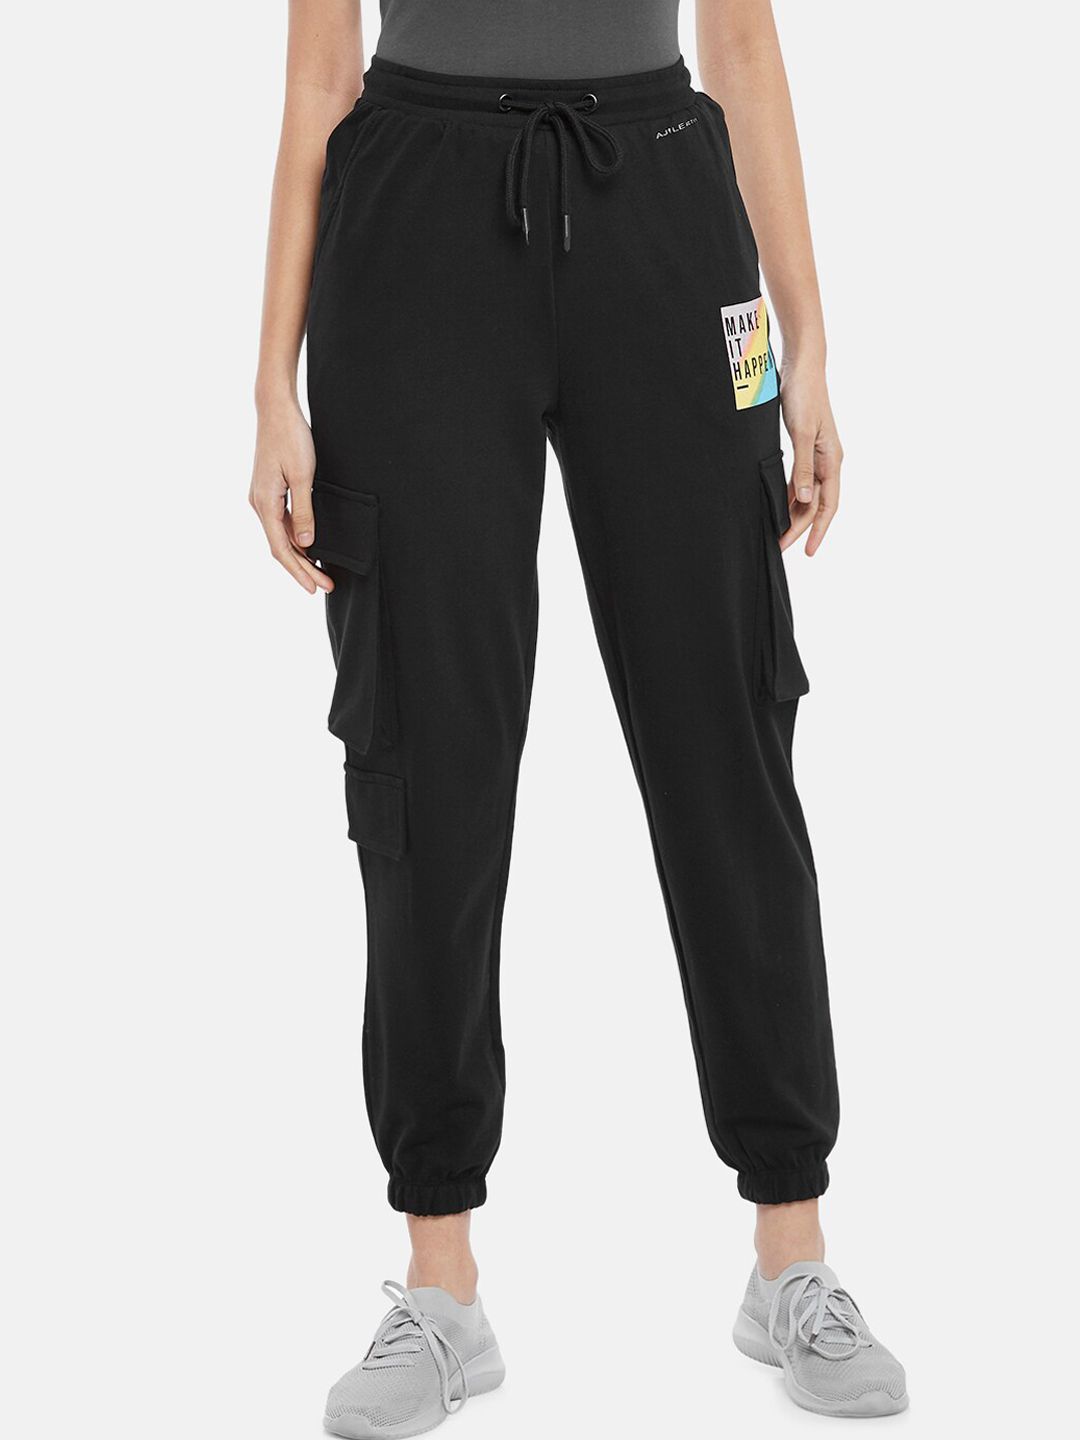 Ajile by Pantaloons Woman Black Track Pants Price in India